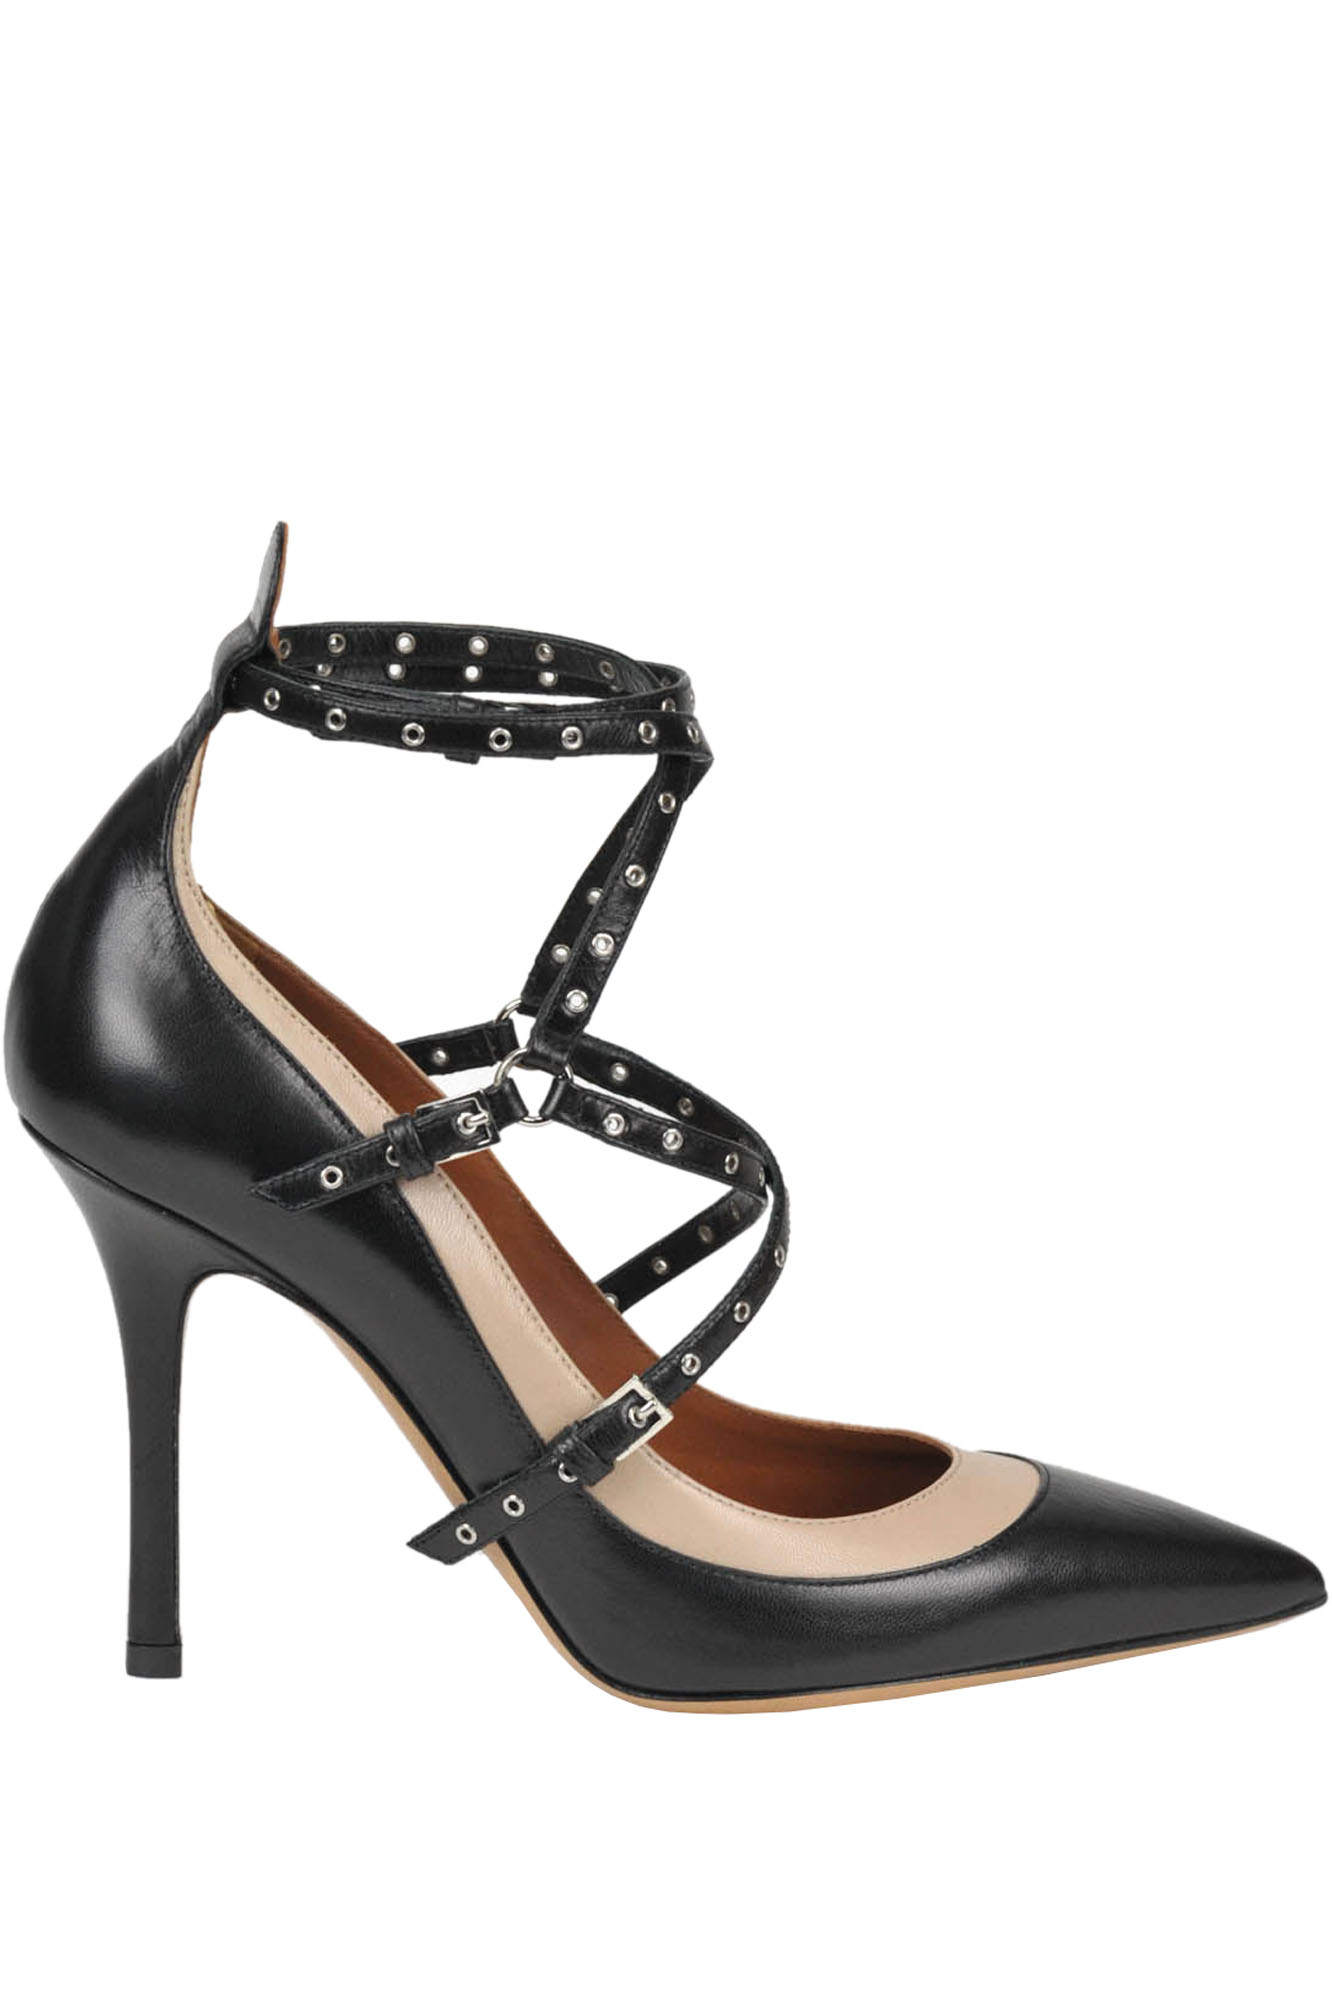 Valentino 'Love Latch' leather pumps - Buy online on Glamest Fashion ...